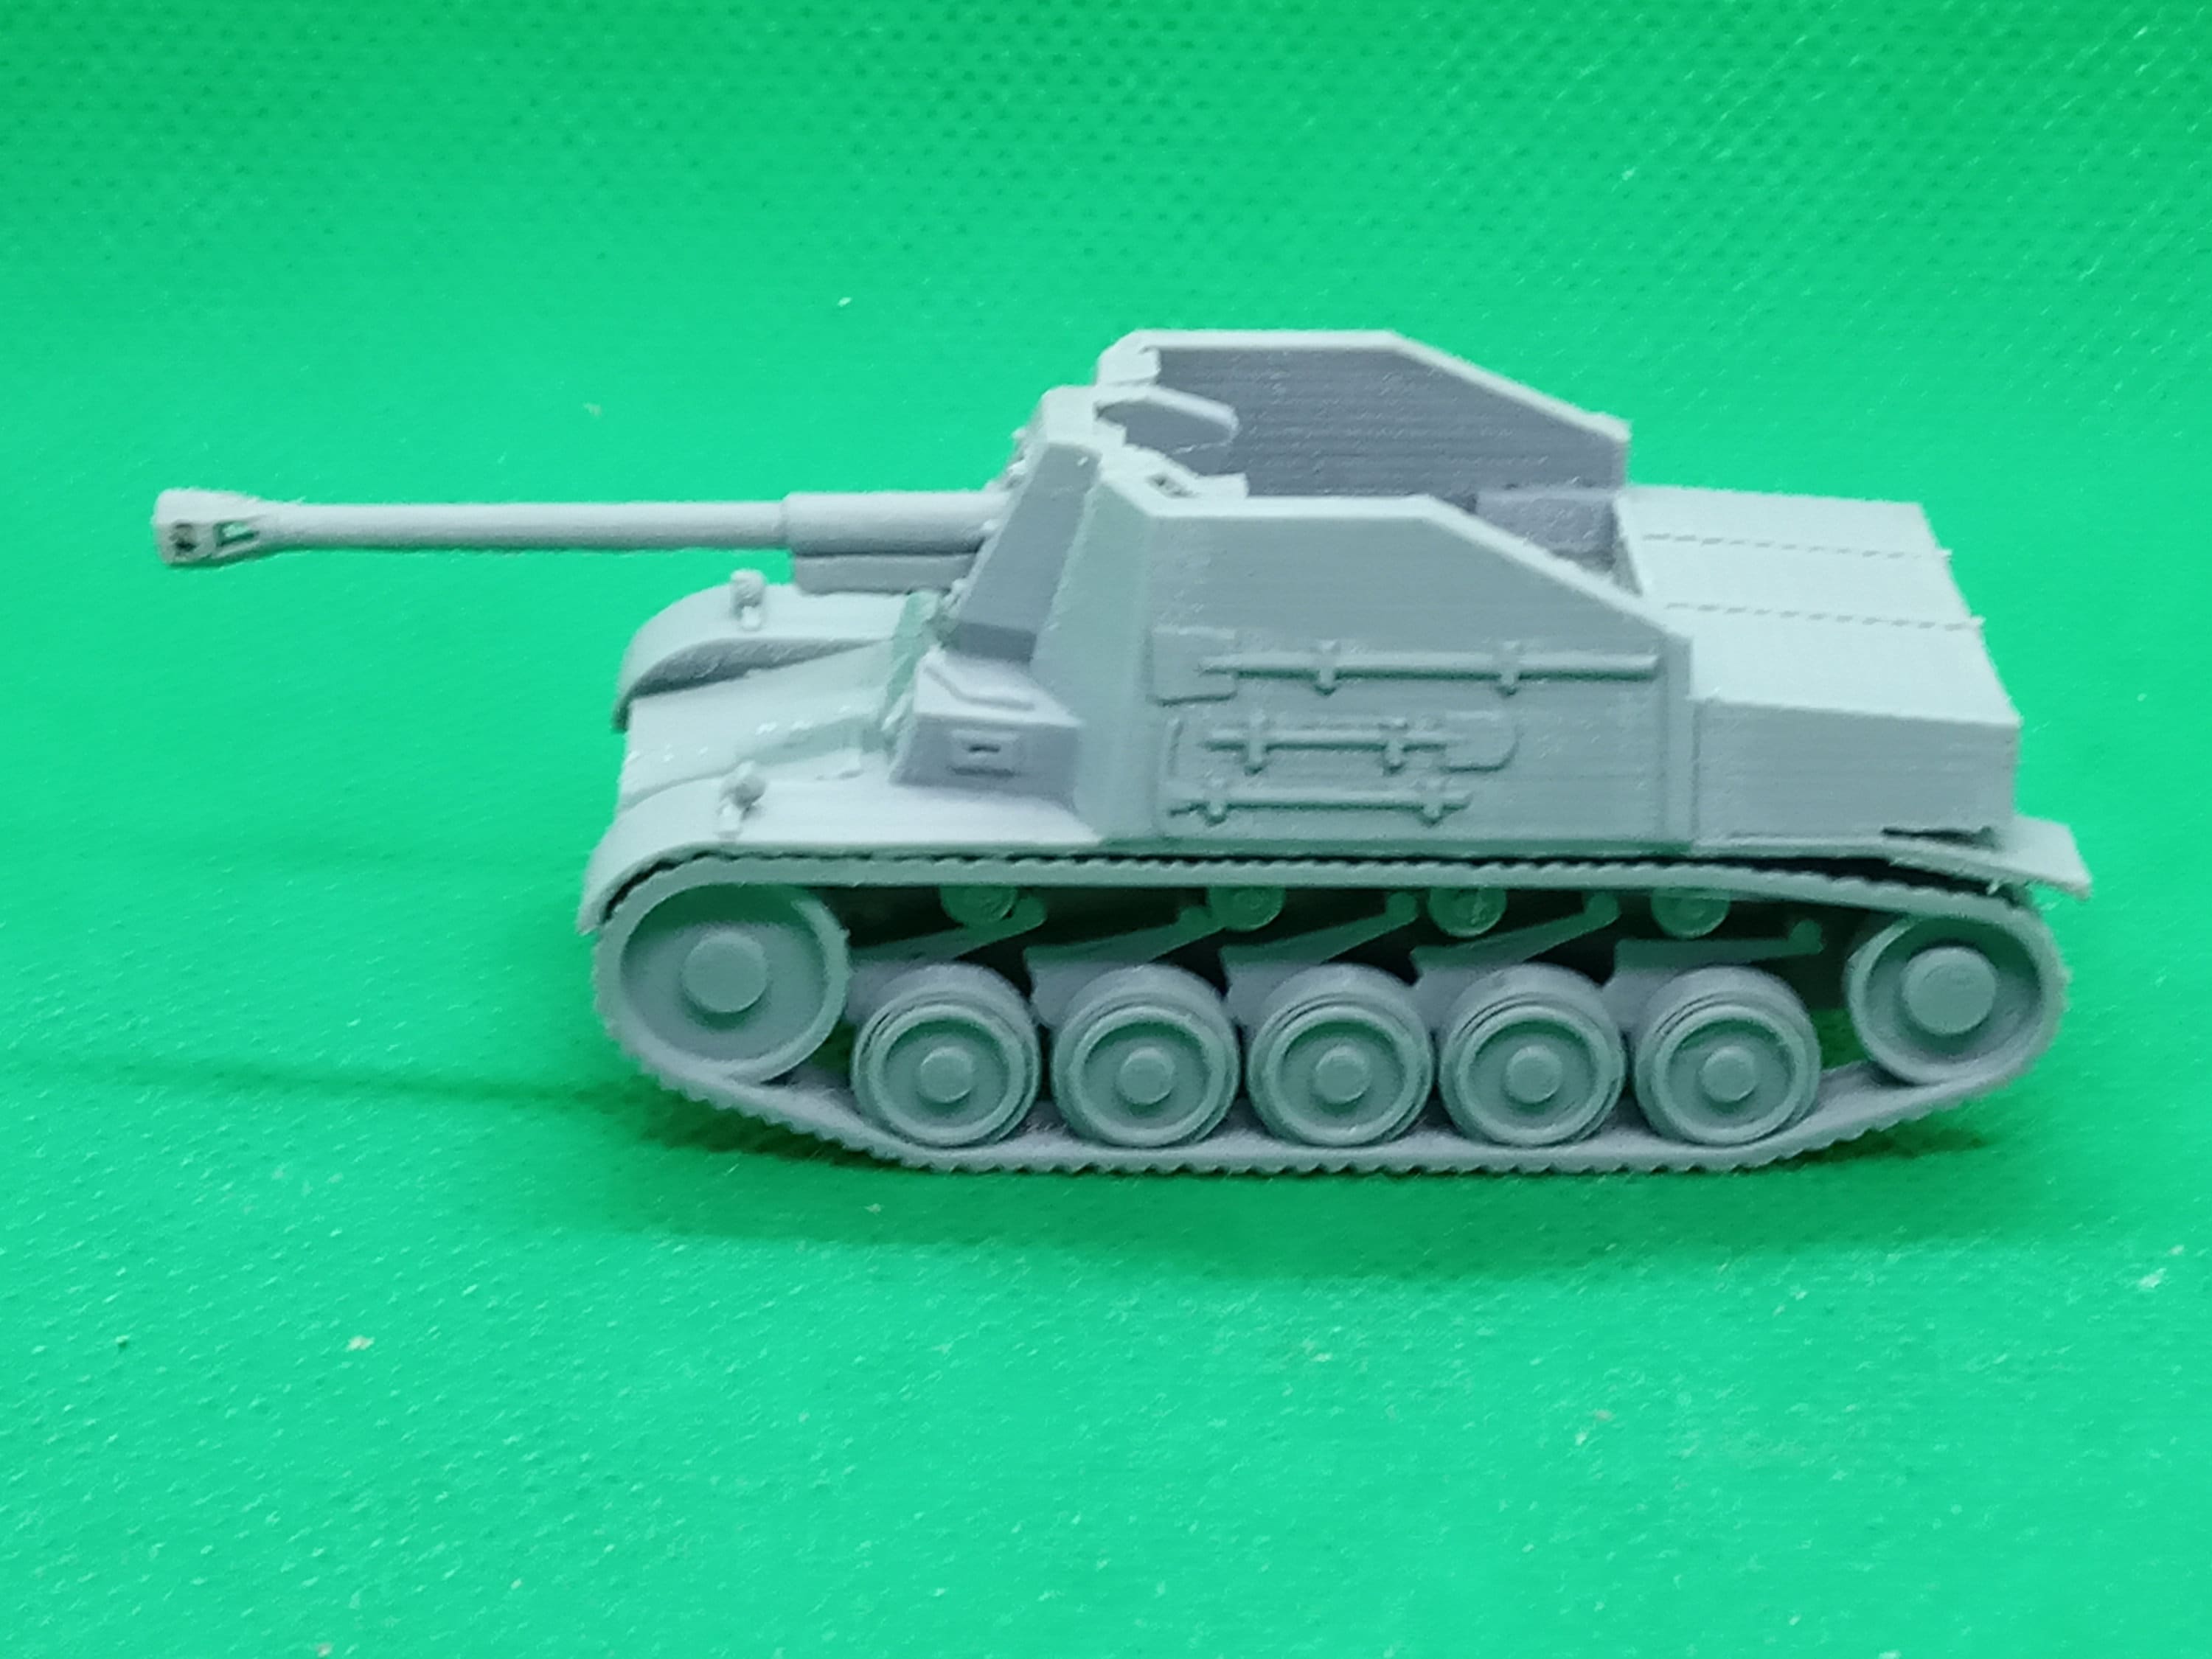 1/72 Scale German Sd.kfz 131 Marder II Tank Destroyer, World War Two,  Eastern Front, Western Front, 3D Printed, Wargaming 